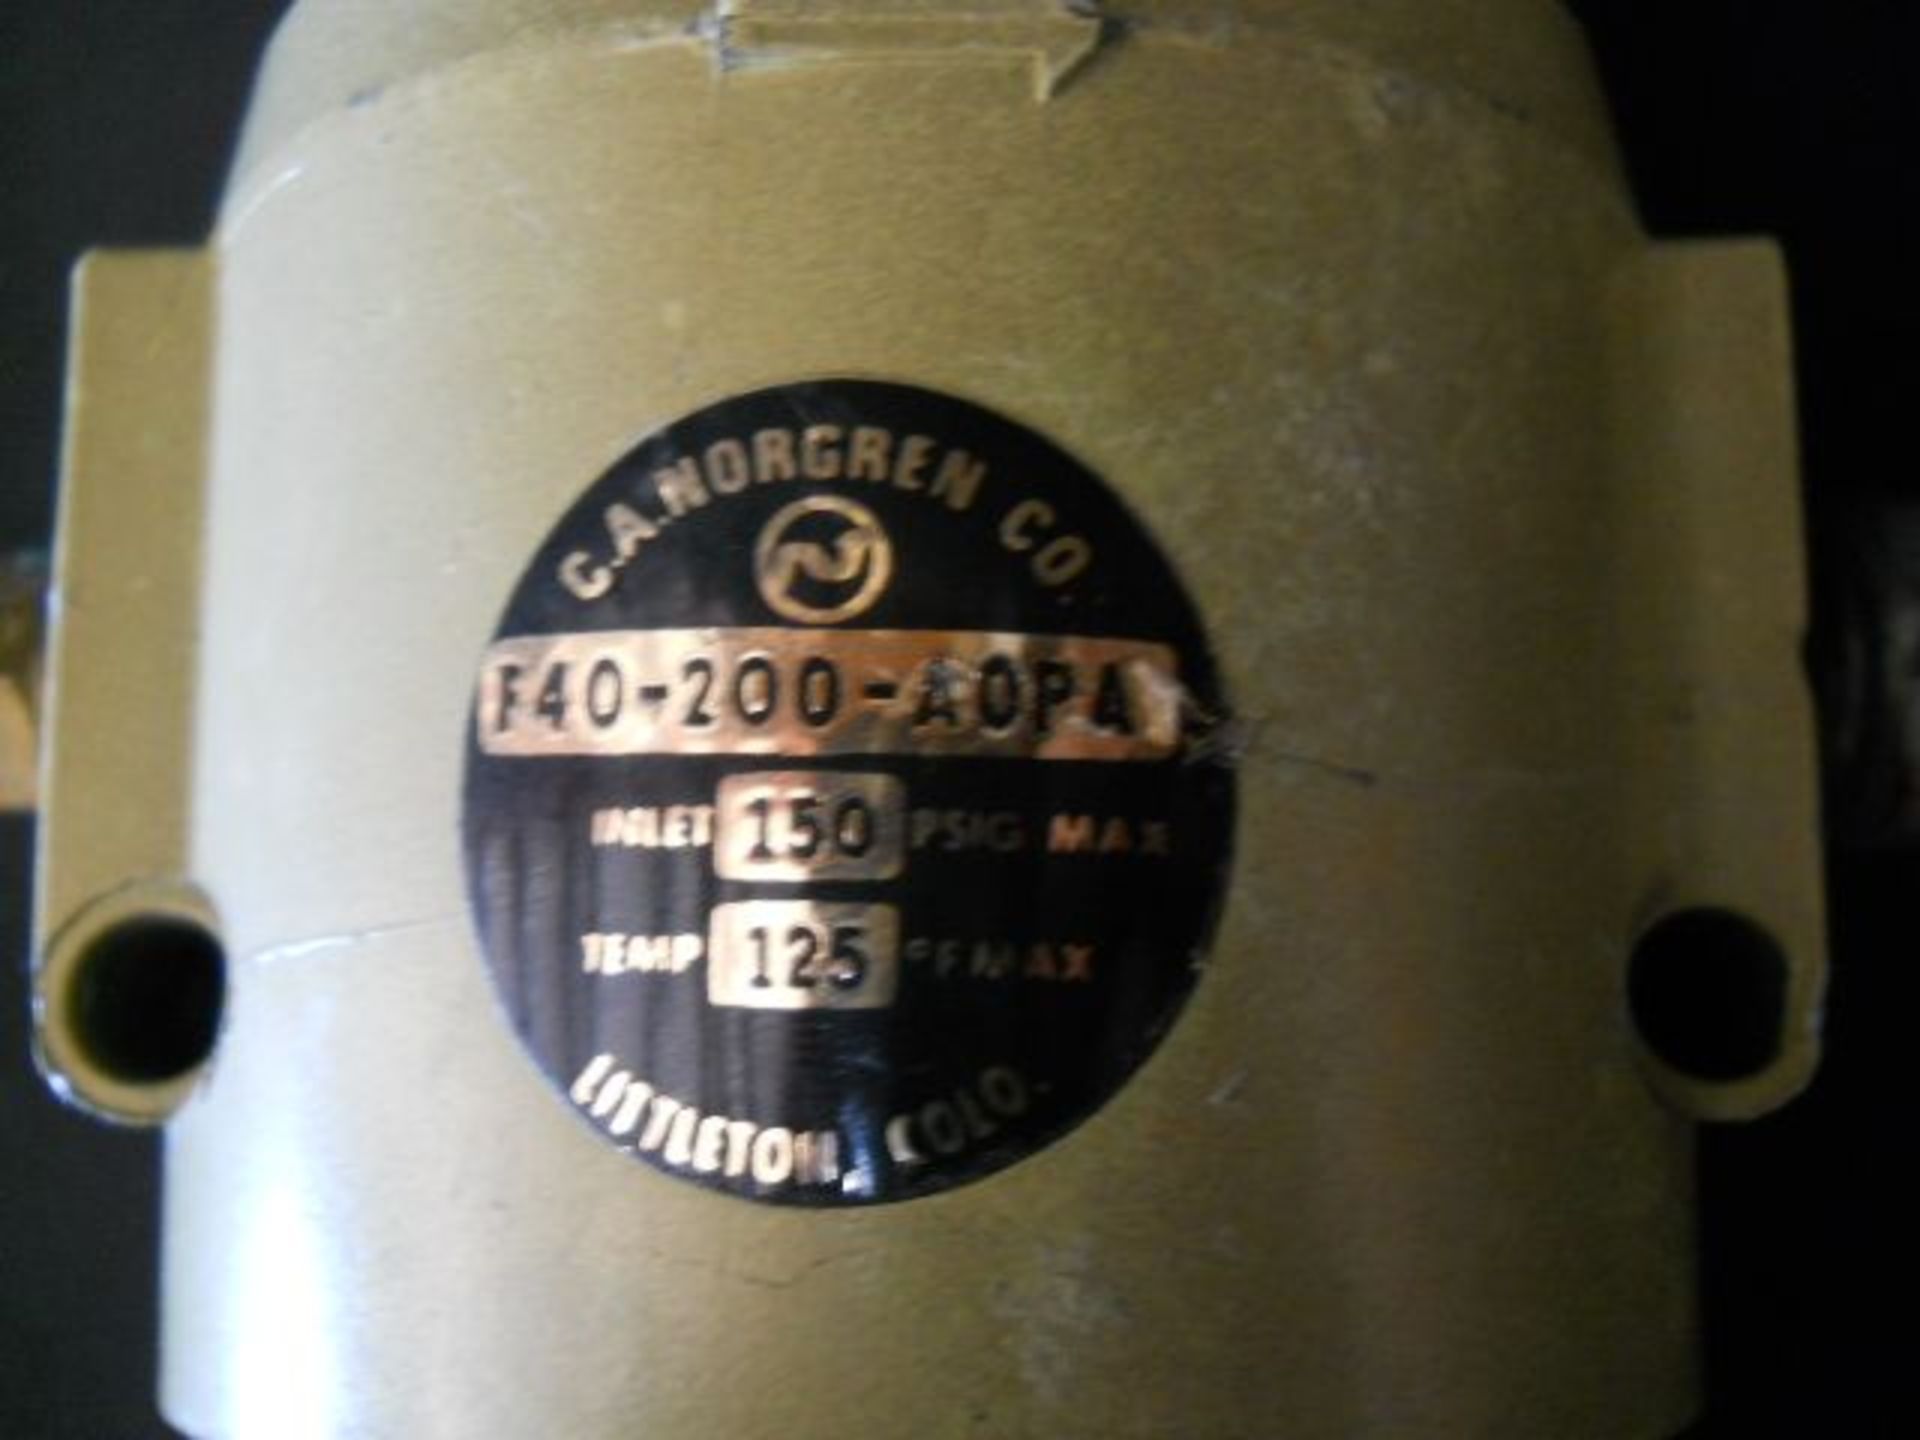 C A Norgren Air Oil Removal Filter F40-200-AOPA (F40200AOPA), Qty 1, 330887821927 - Image 2 of 7